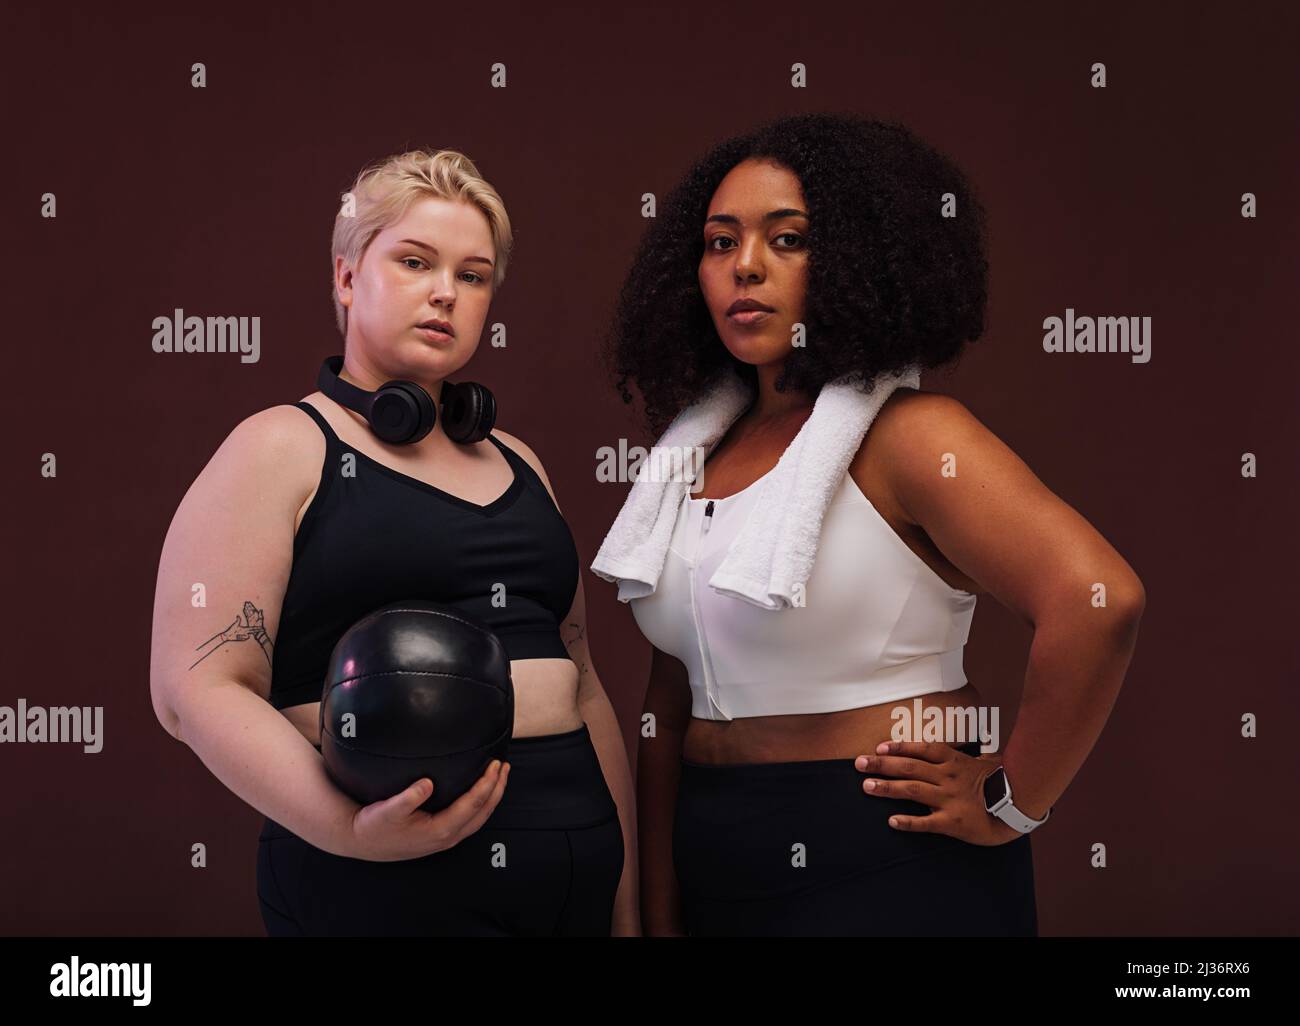 Two plus size women in sports clothes standing in studio. Young female athletes posing together against brown background. Stock Photo